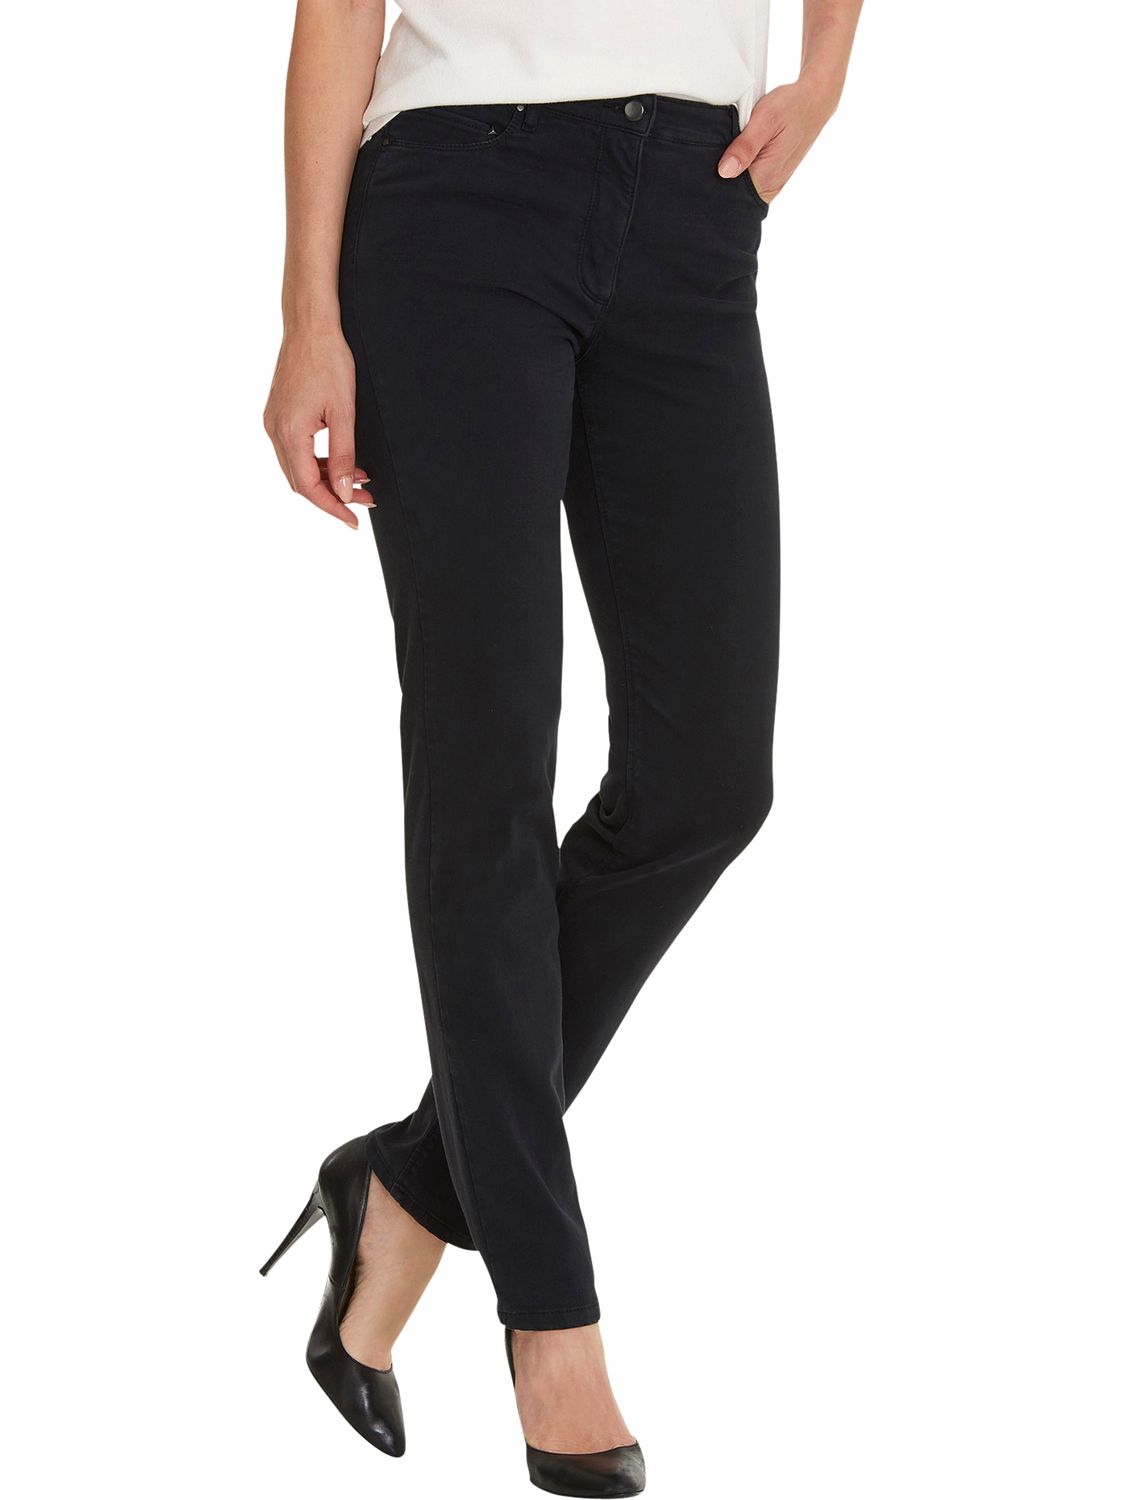 Betty Barclay Perfect Body Jeans, Black